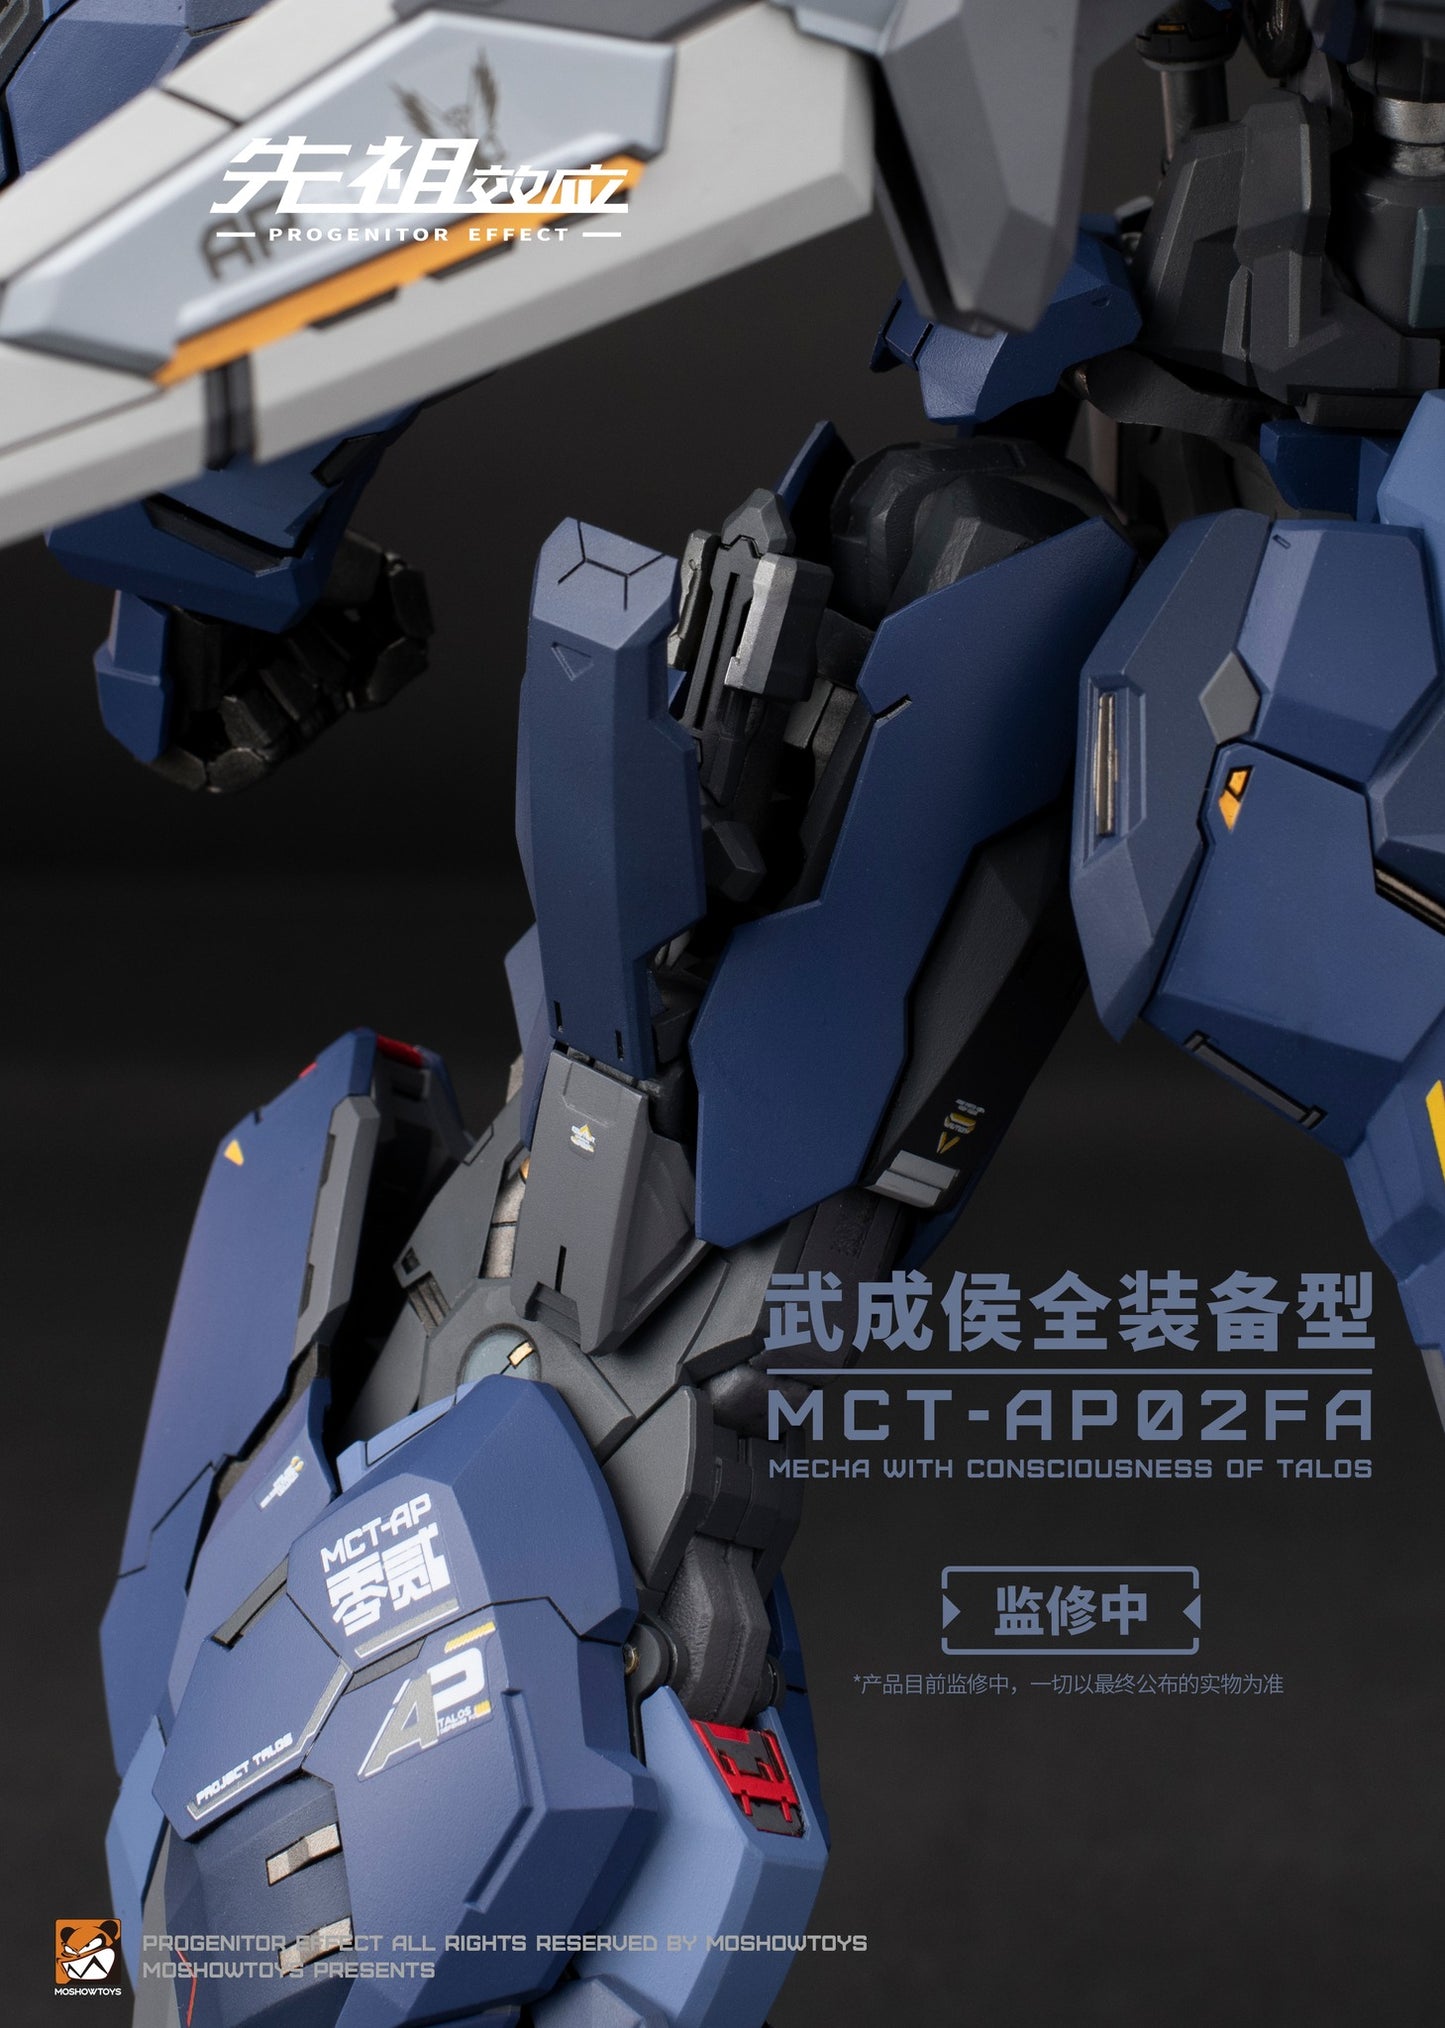 Coming fully equipped with an arsenal of accessories and interchangeable weapons, this unique and original figure stands about 11.41 inches tall and is made of ABS, diecast, and alloy. With Progenitor Effect like Takeda Shingen and Masamune Brahma Maru Mecha 